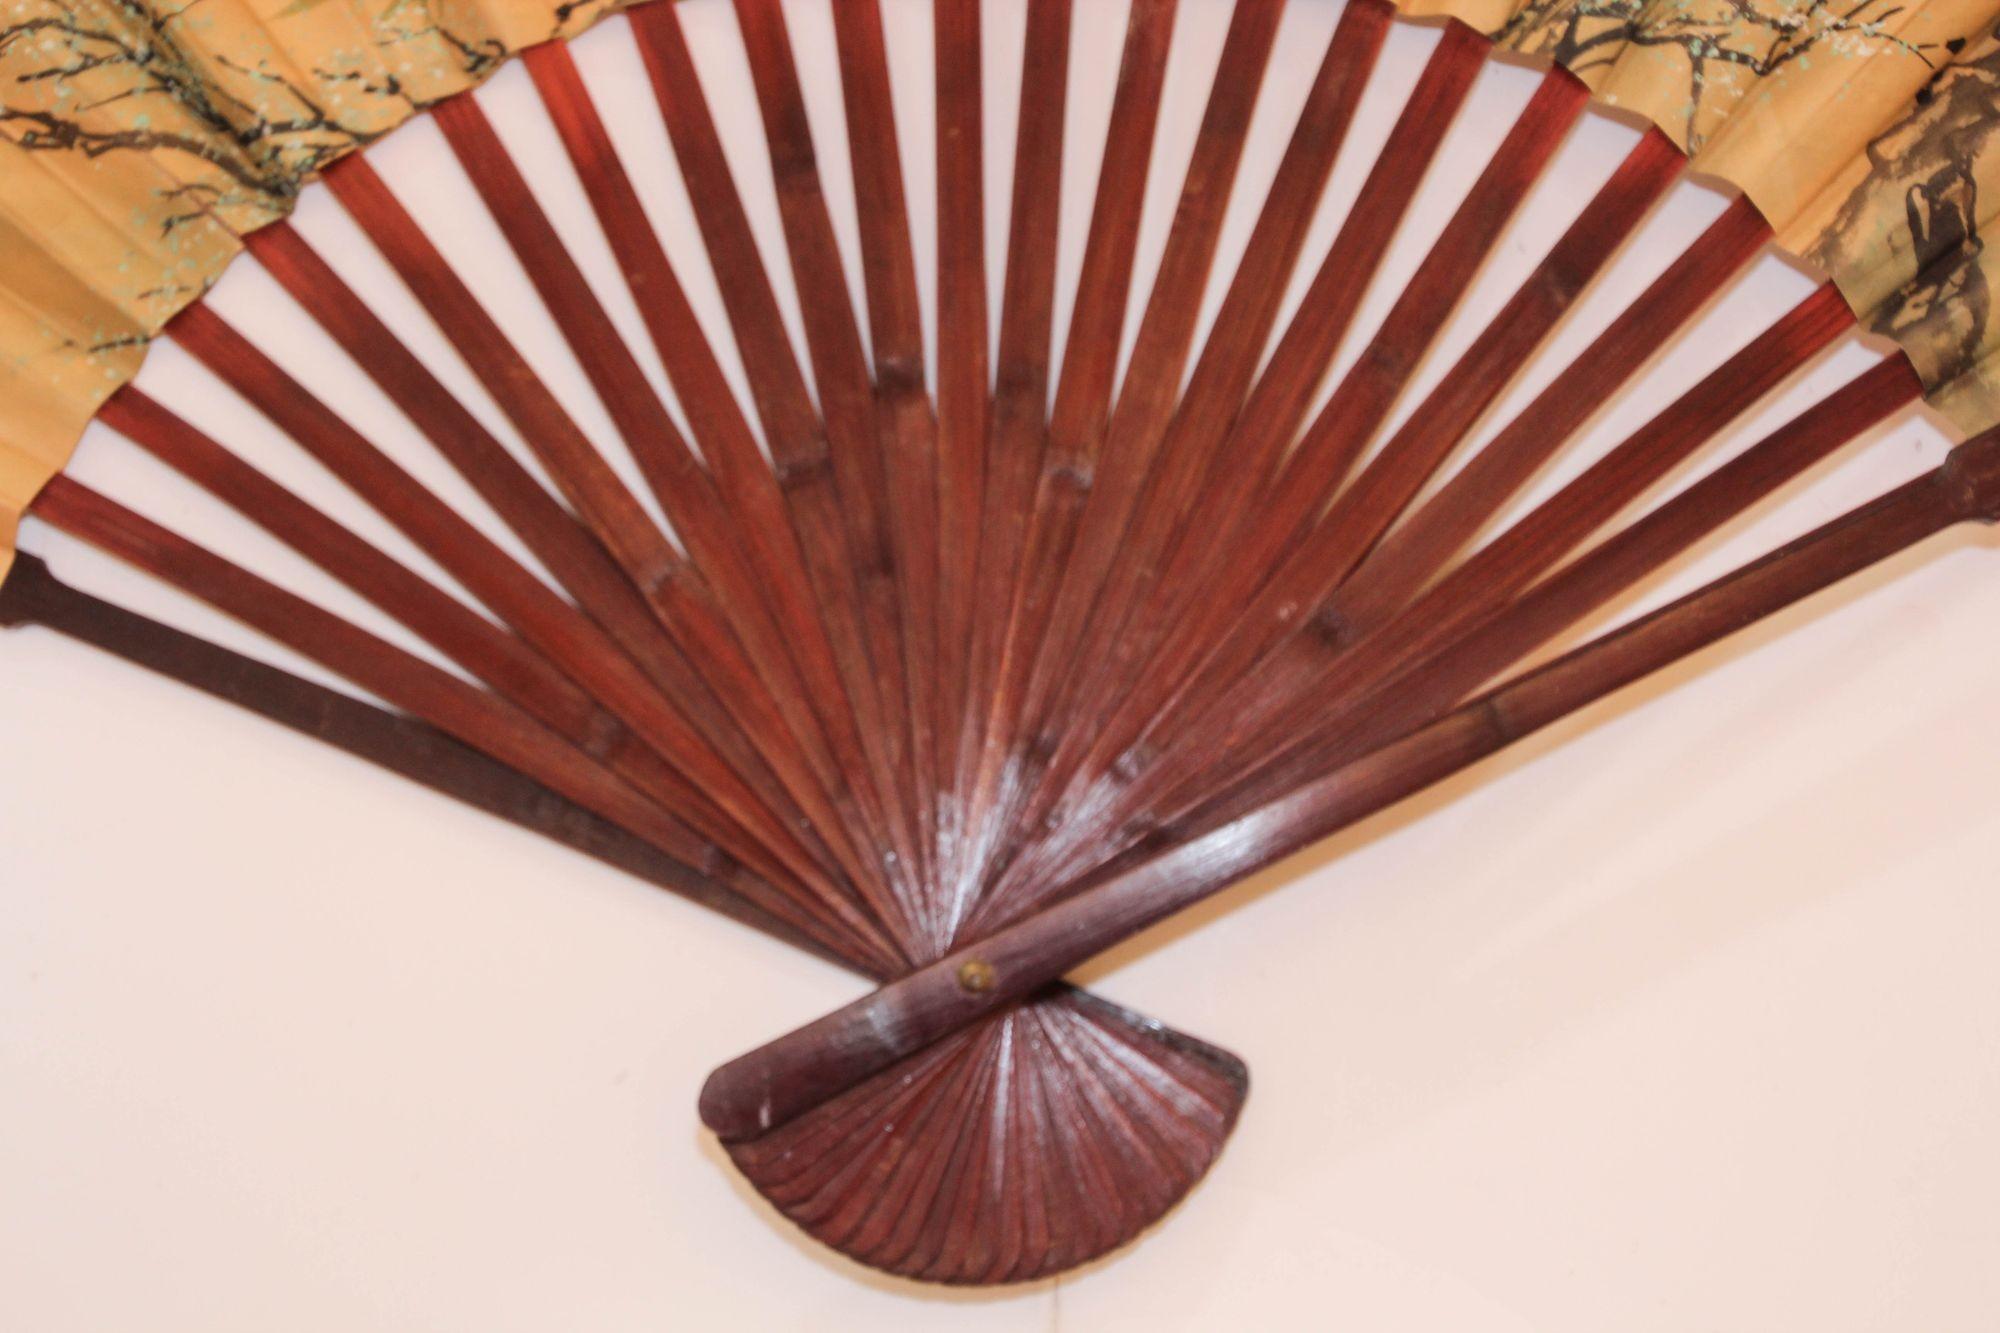 Mid-20th century hand-painted lacquered wood and heavy paper large decorative fan.
Vintage Asian Extra Large Hand Painted Folding Fan Art.
Stunning vintage Asian large hand-painted folding wall fan chinoiserie.
In good vintage condition! This